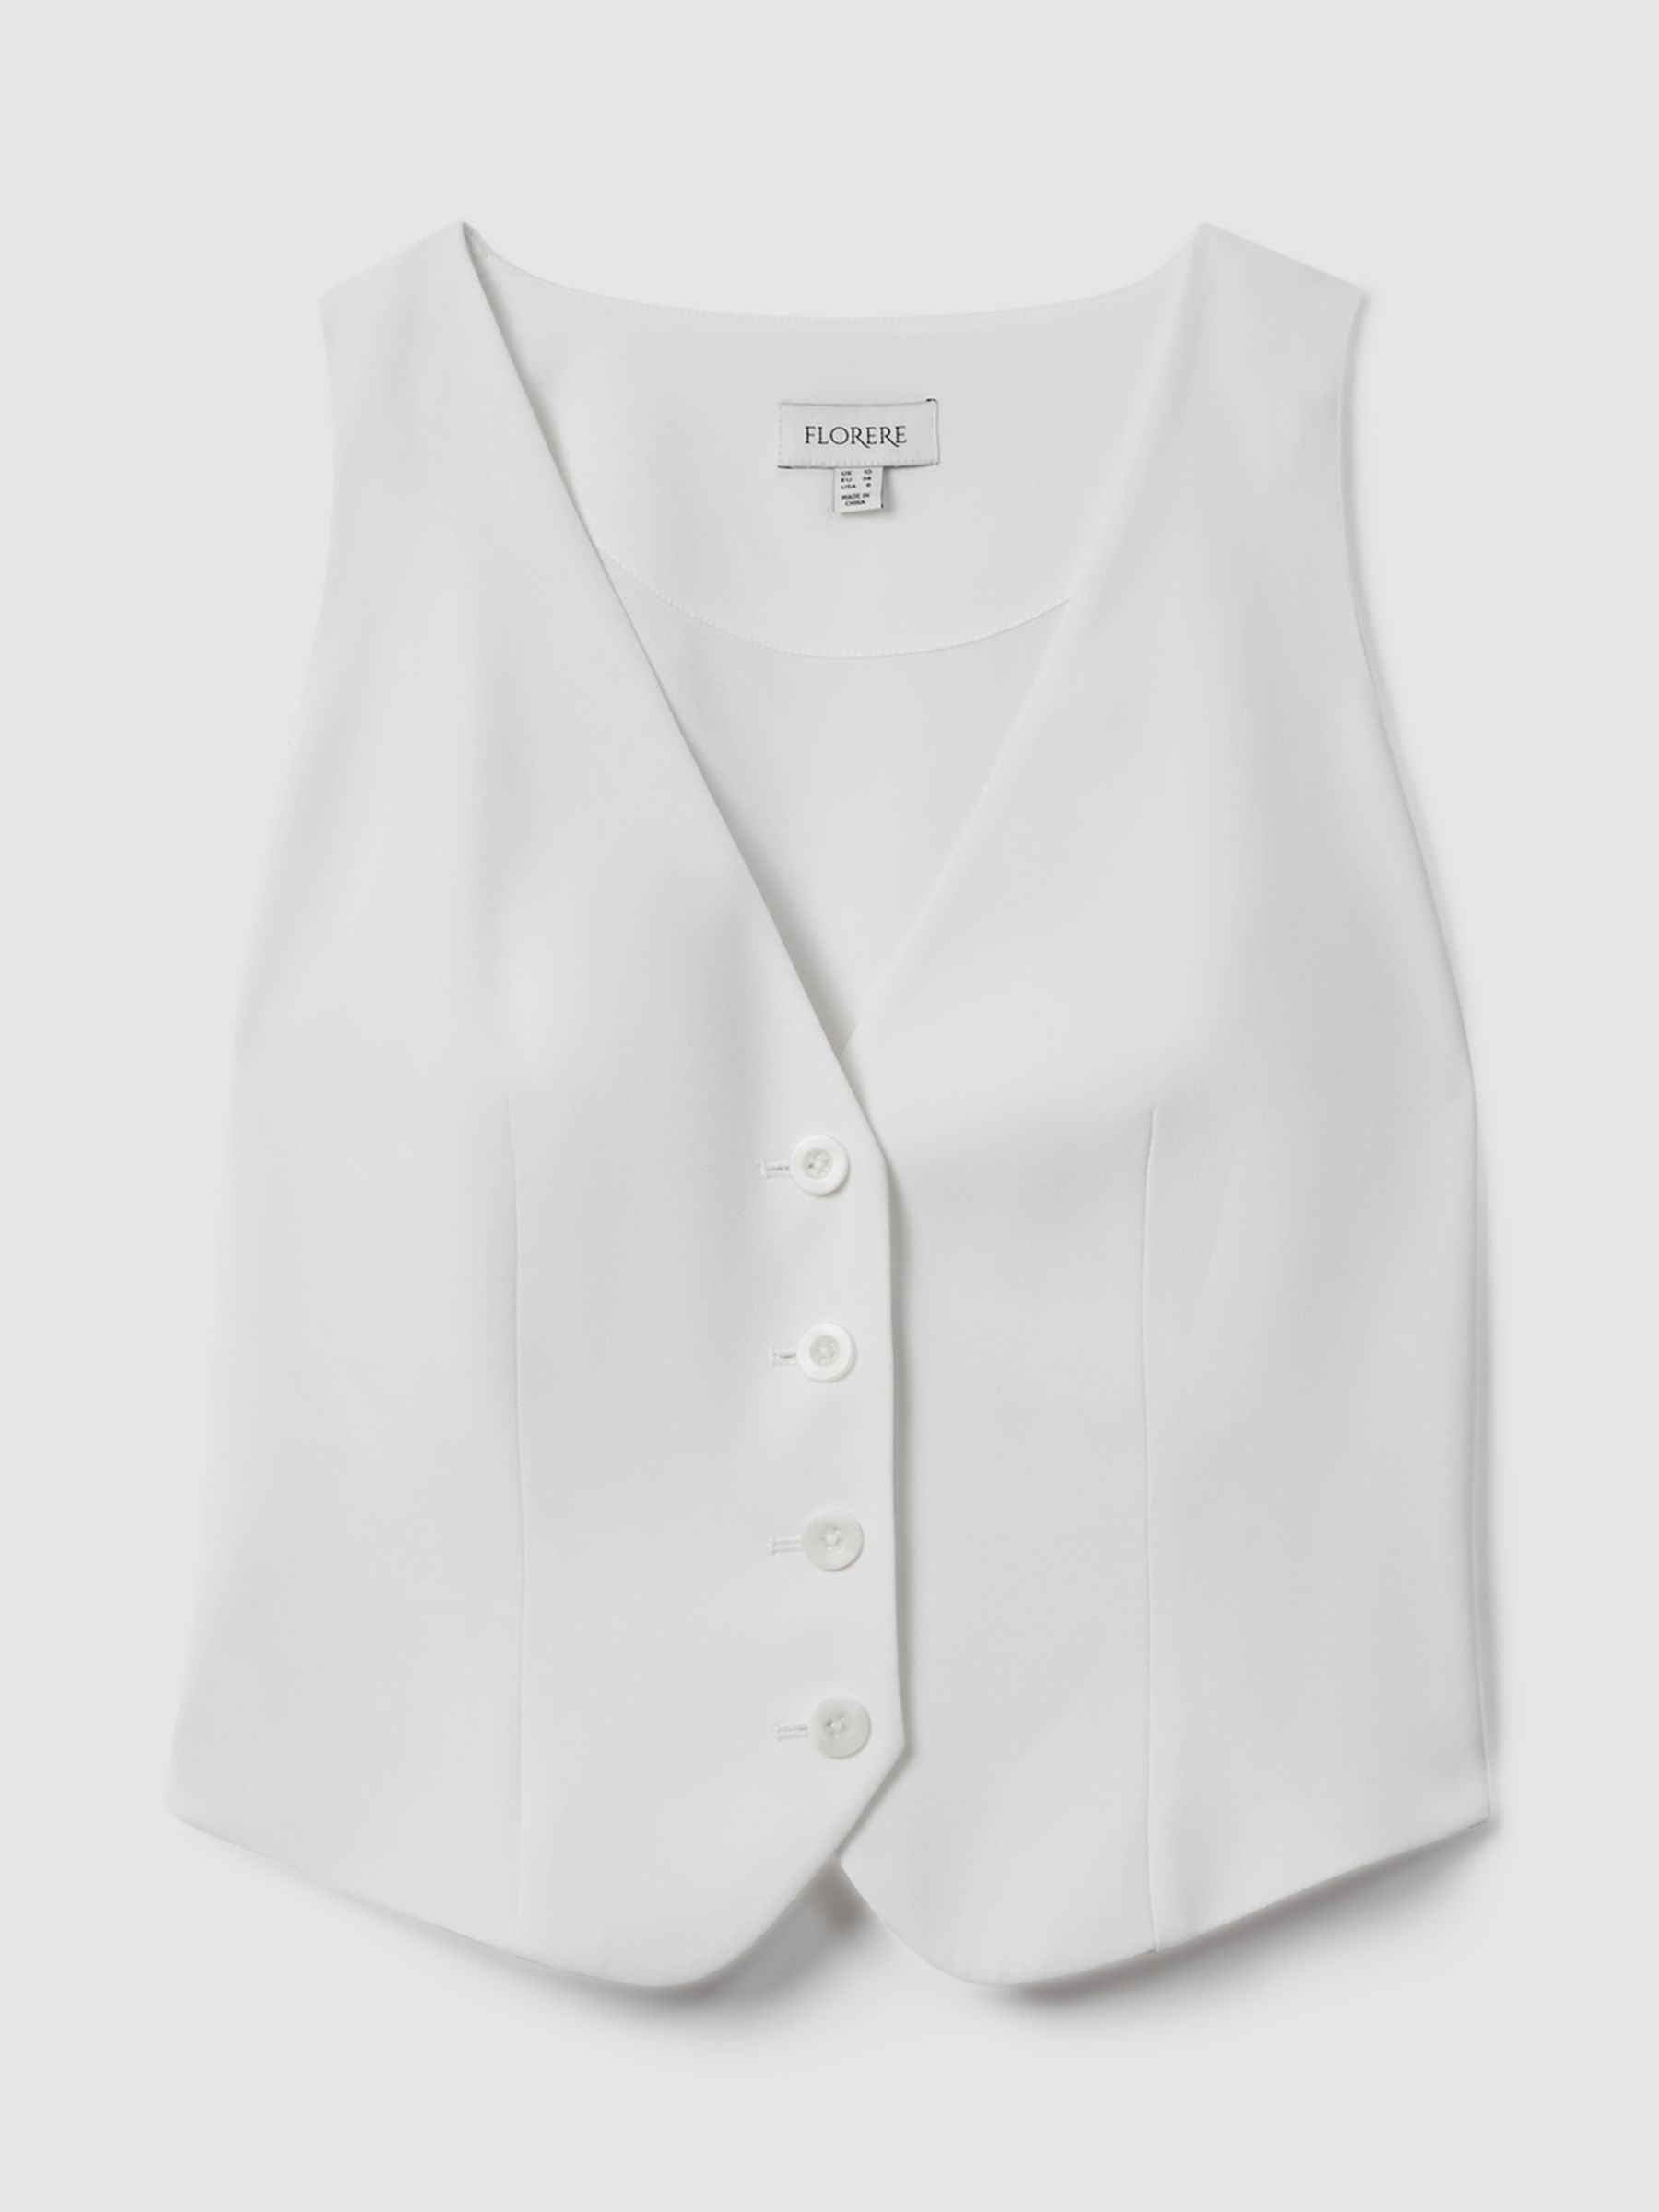 Buy FLORERE Tailored Waistcoat Online at johnlewis.com